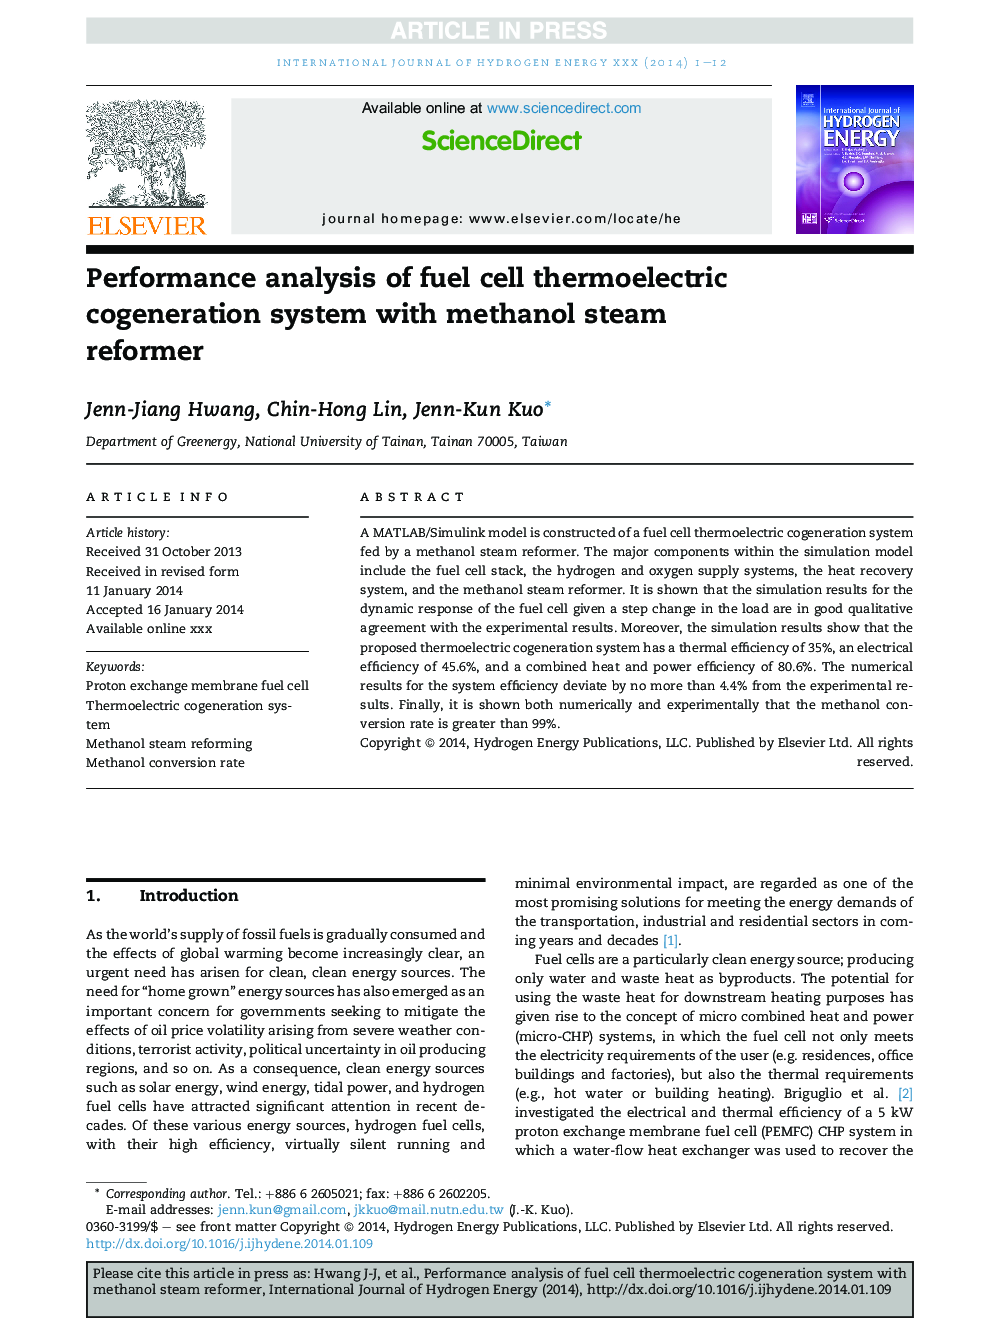 Performance analysis of fuel cell thermoelectric cogeneration system with methanol steam reformer